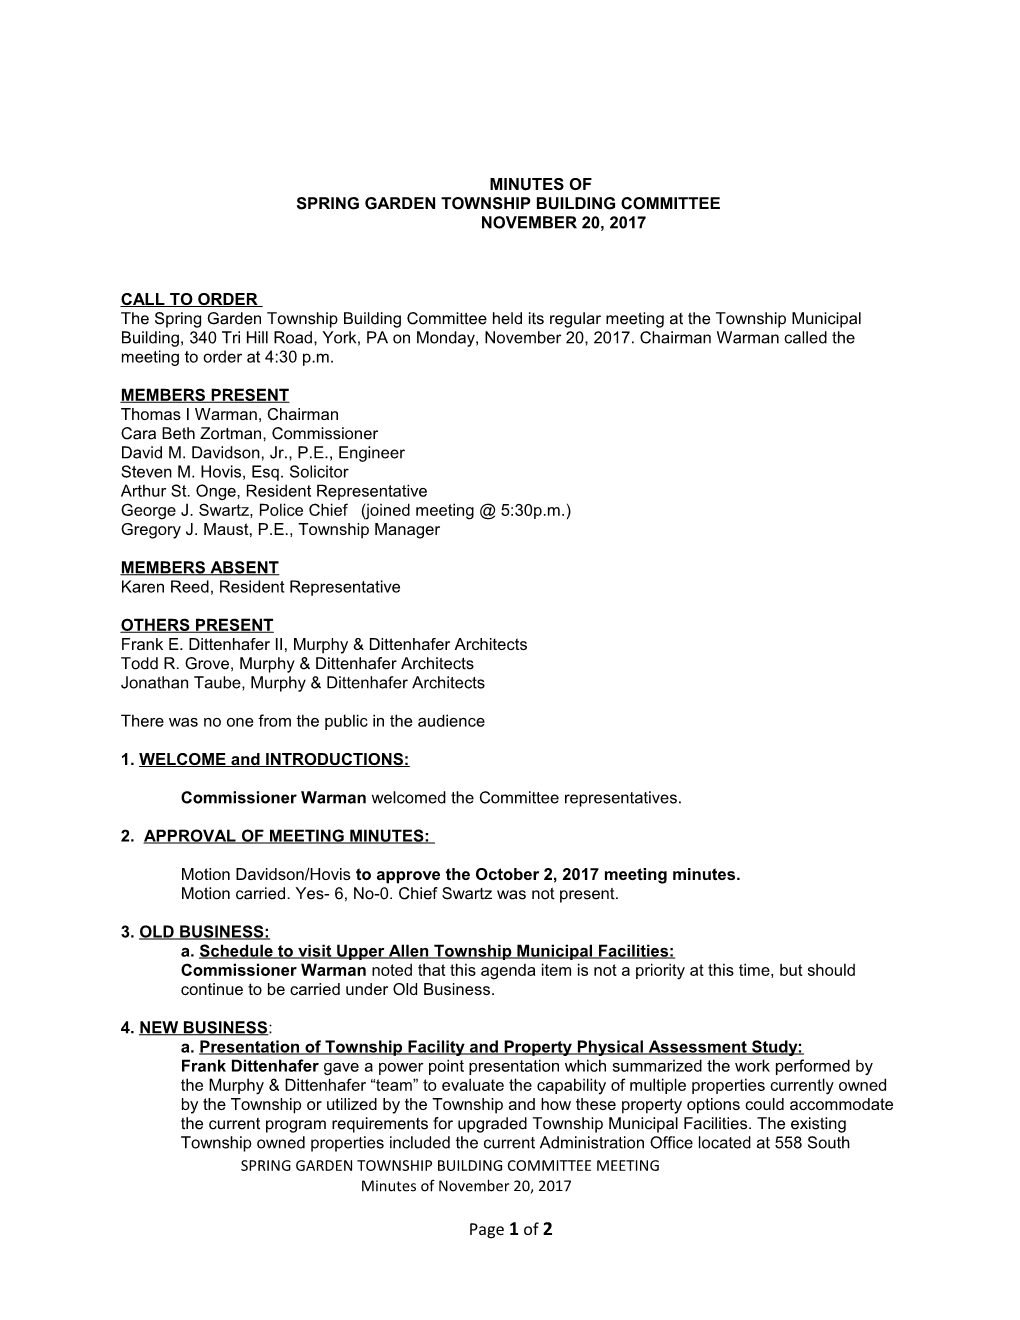 Spring Garden Township Building Committee